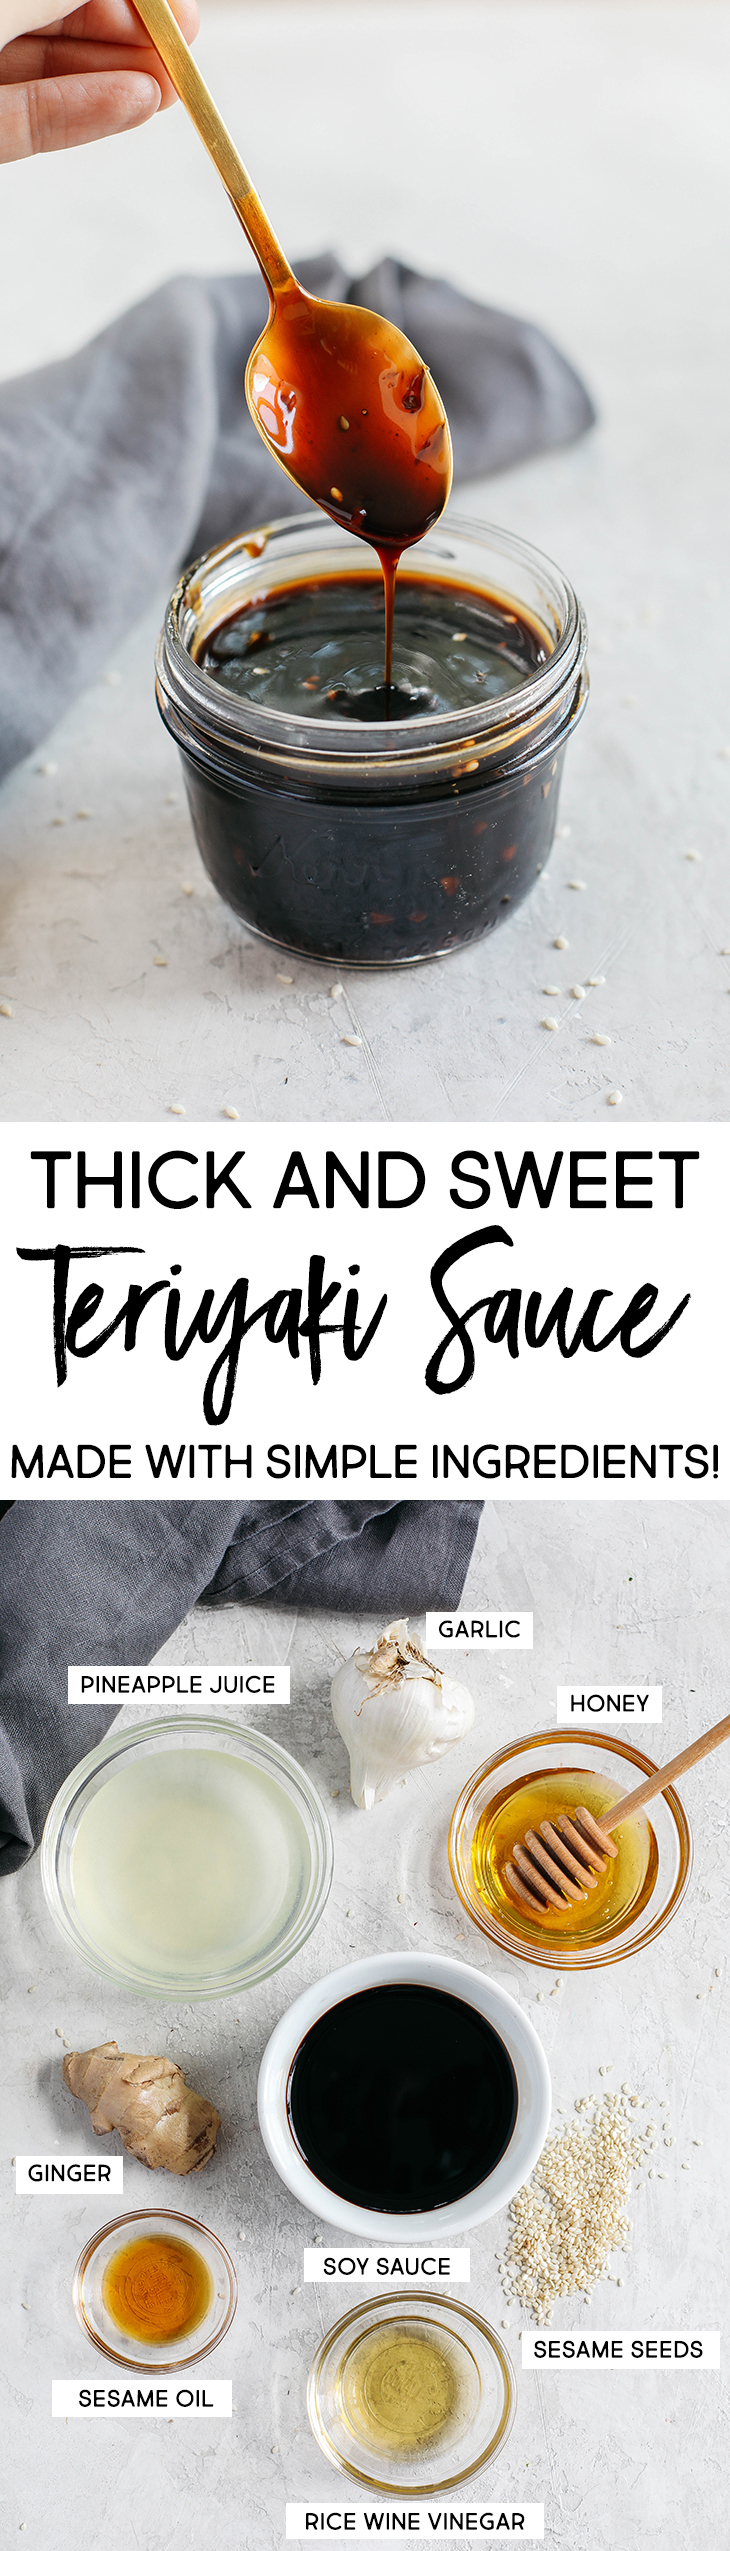 Skip store-bought and make this EASY Healthy Teriyaki Sauce that is sticky, sweet and made in just 5 minutes using fresh, simple ingredients you probably already have on hand!